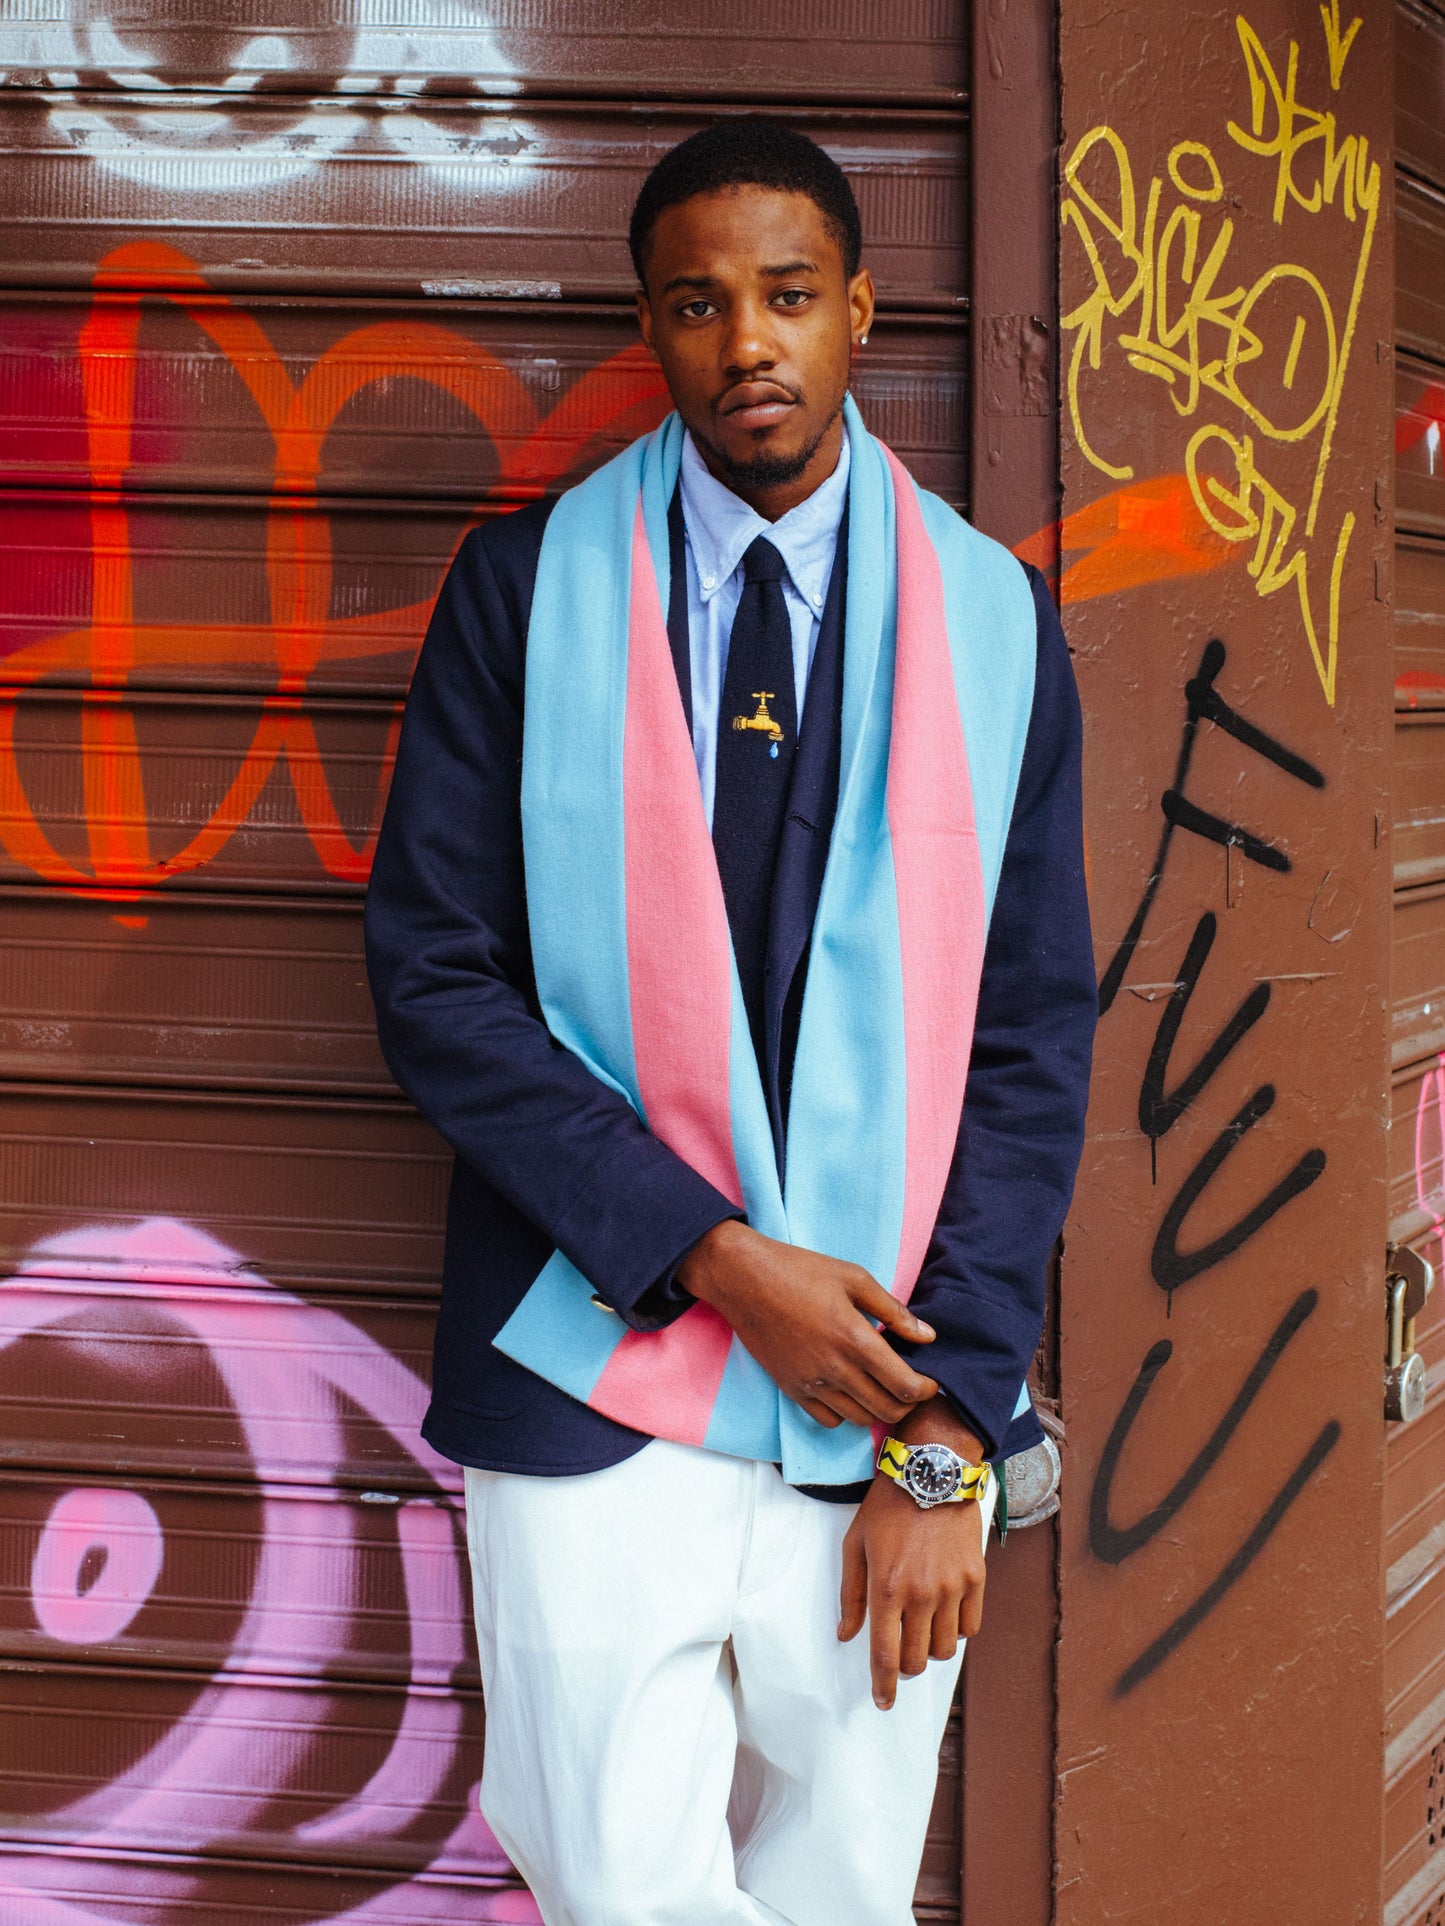 100% wool schoolboy scarf (Wool Made-in-England Schoolboy Scarf in Light Blue and Pink)